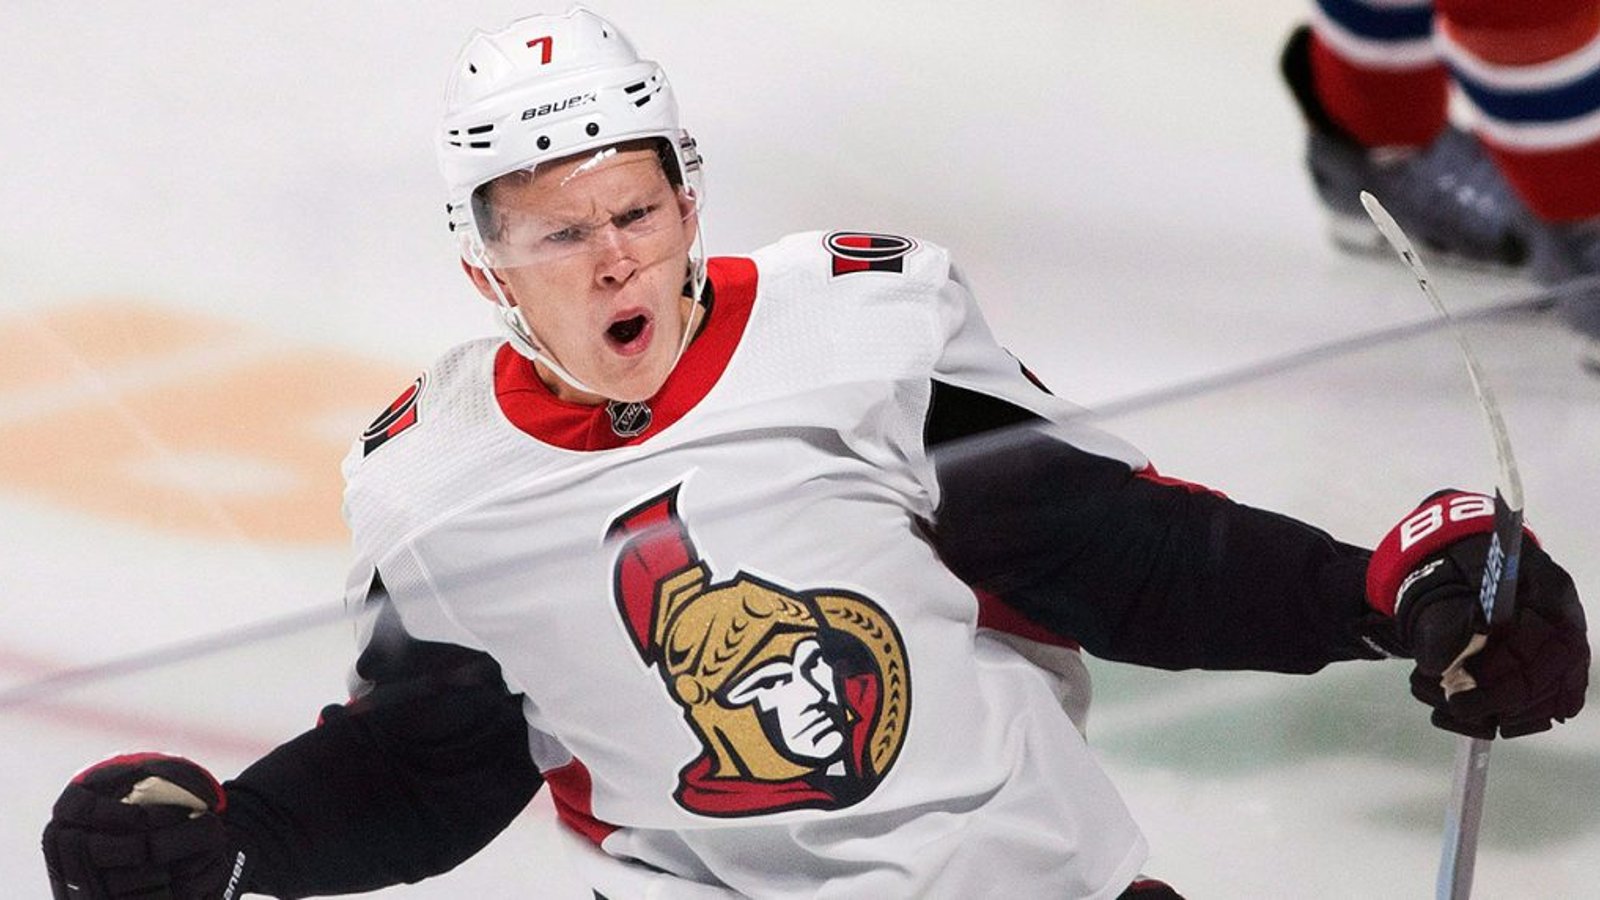 Tkachuk responds to classless move accusations on friend Primeau